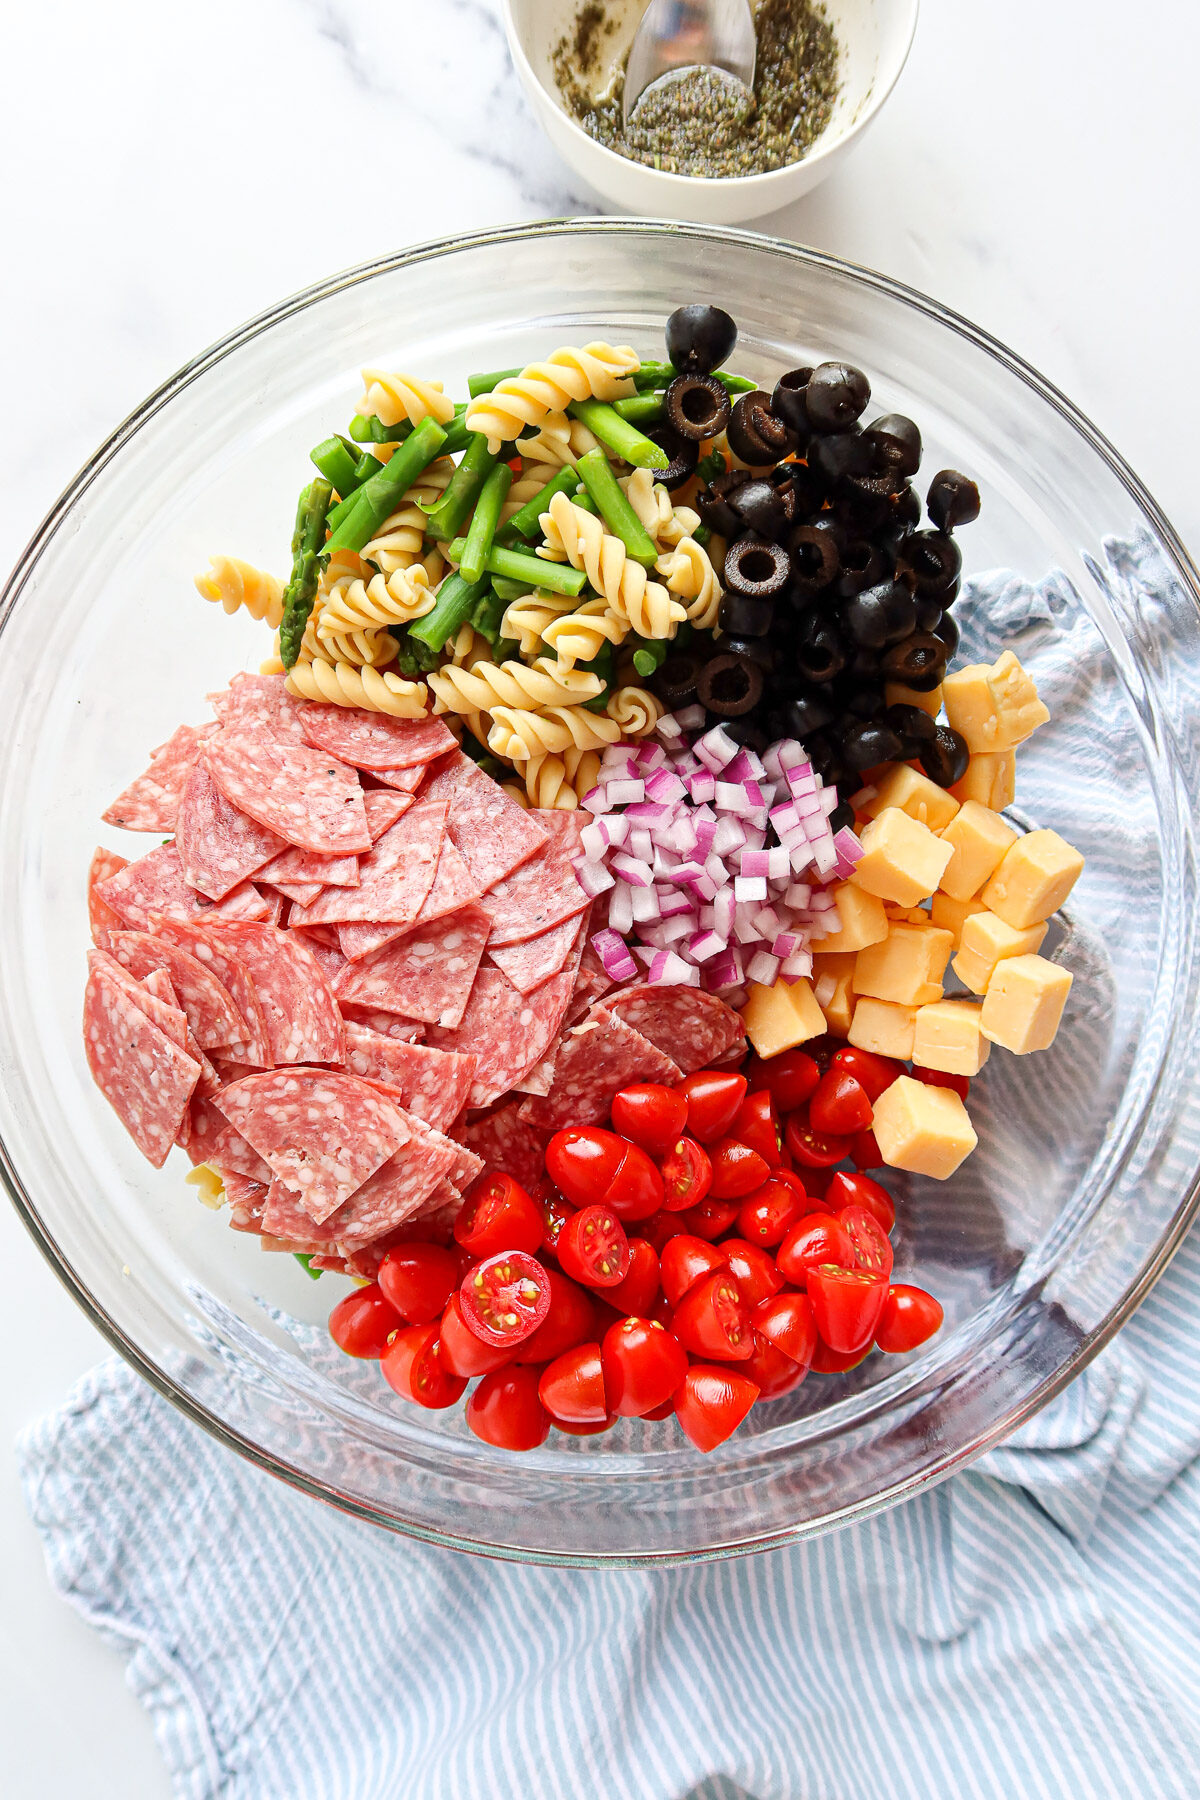 Pasta salad ingredients measured into a large, glass mixing bowl.